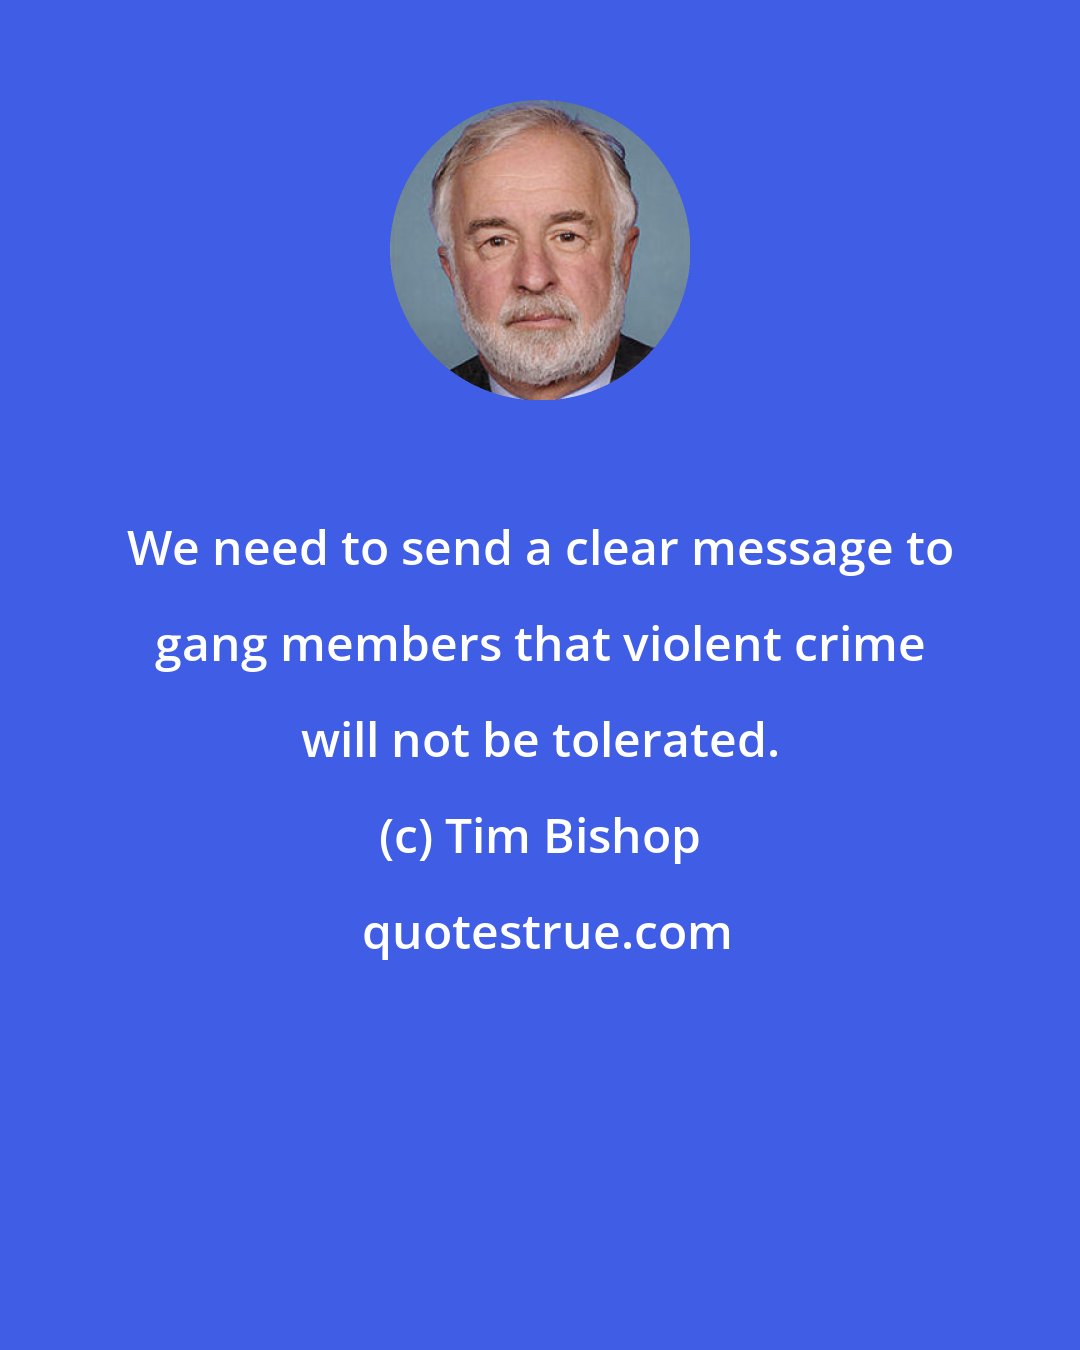 Tim Bishop: We need to send a clear message to gang members that violent crime will not be tolerated.